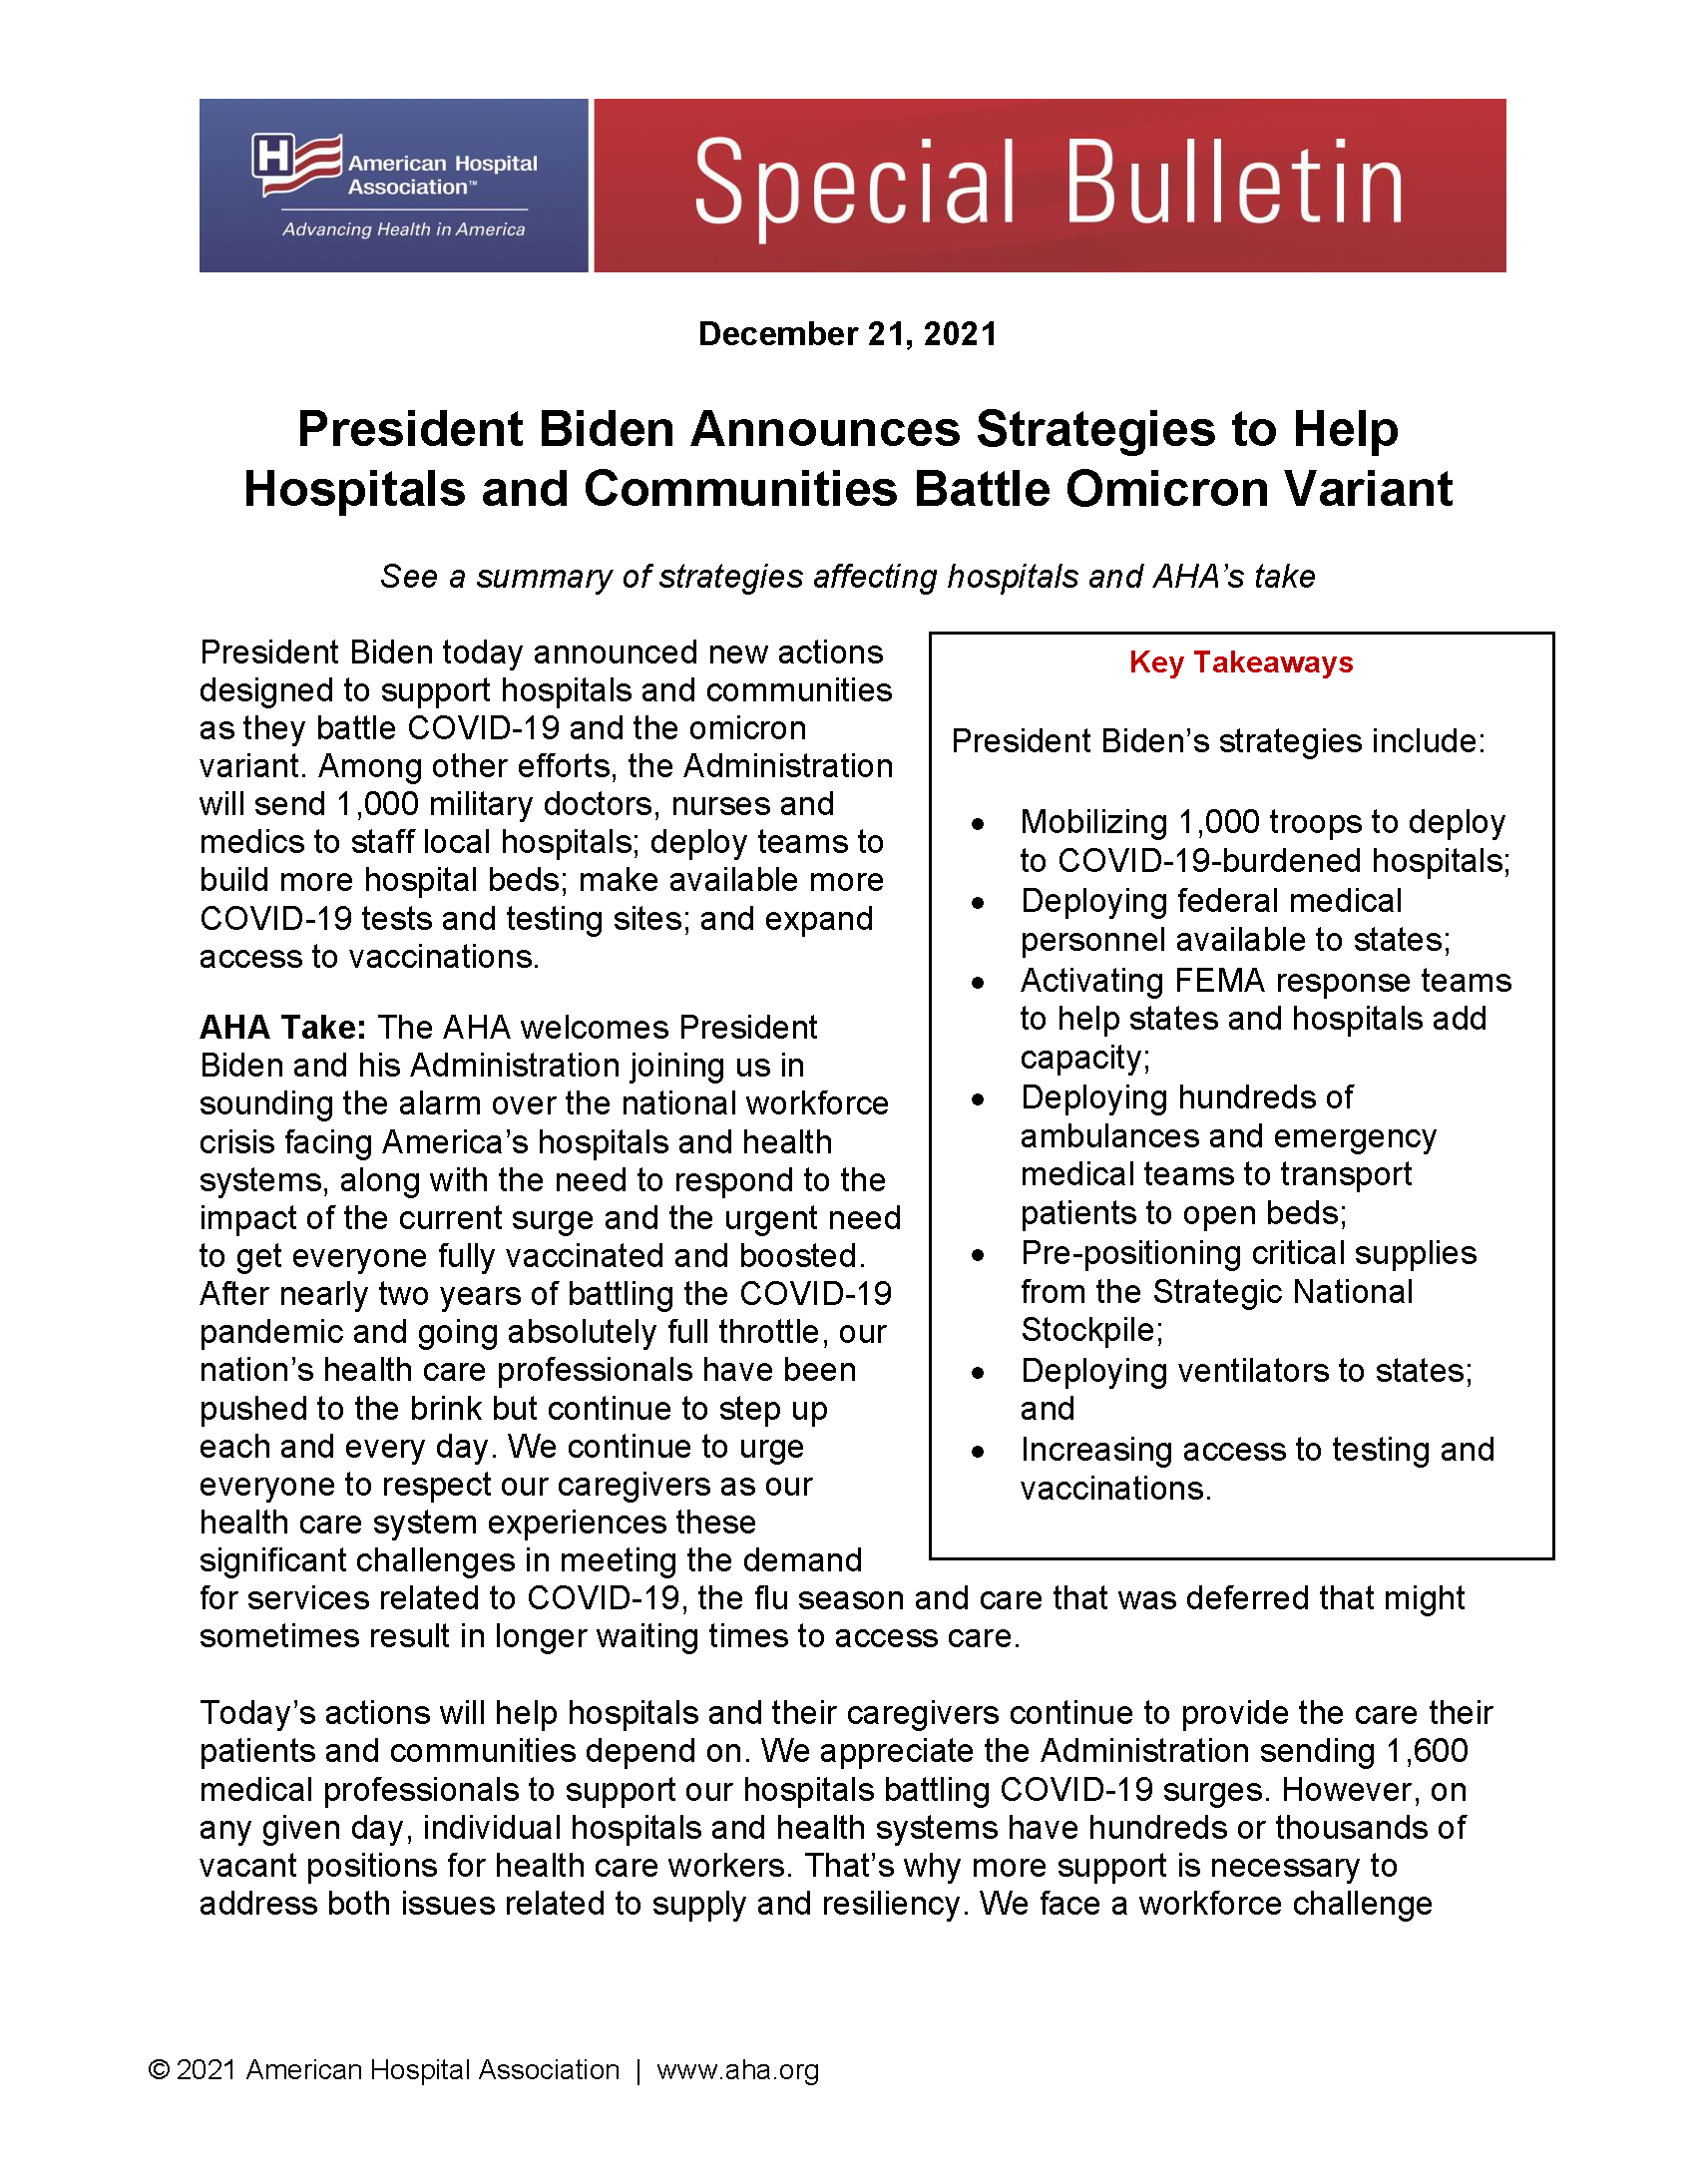 Special Bulletin: President Biden Announces Strategies to Help Hospitals and Communities Battle Omicron Variant page 1.